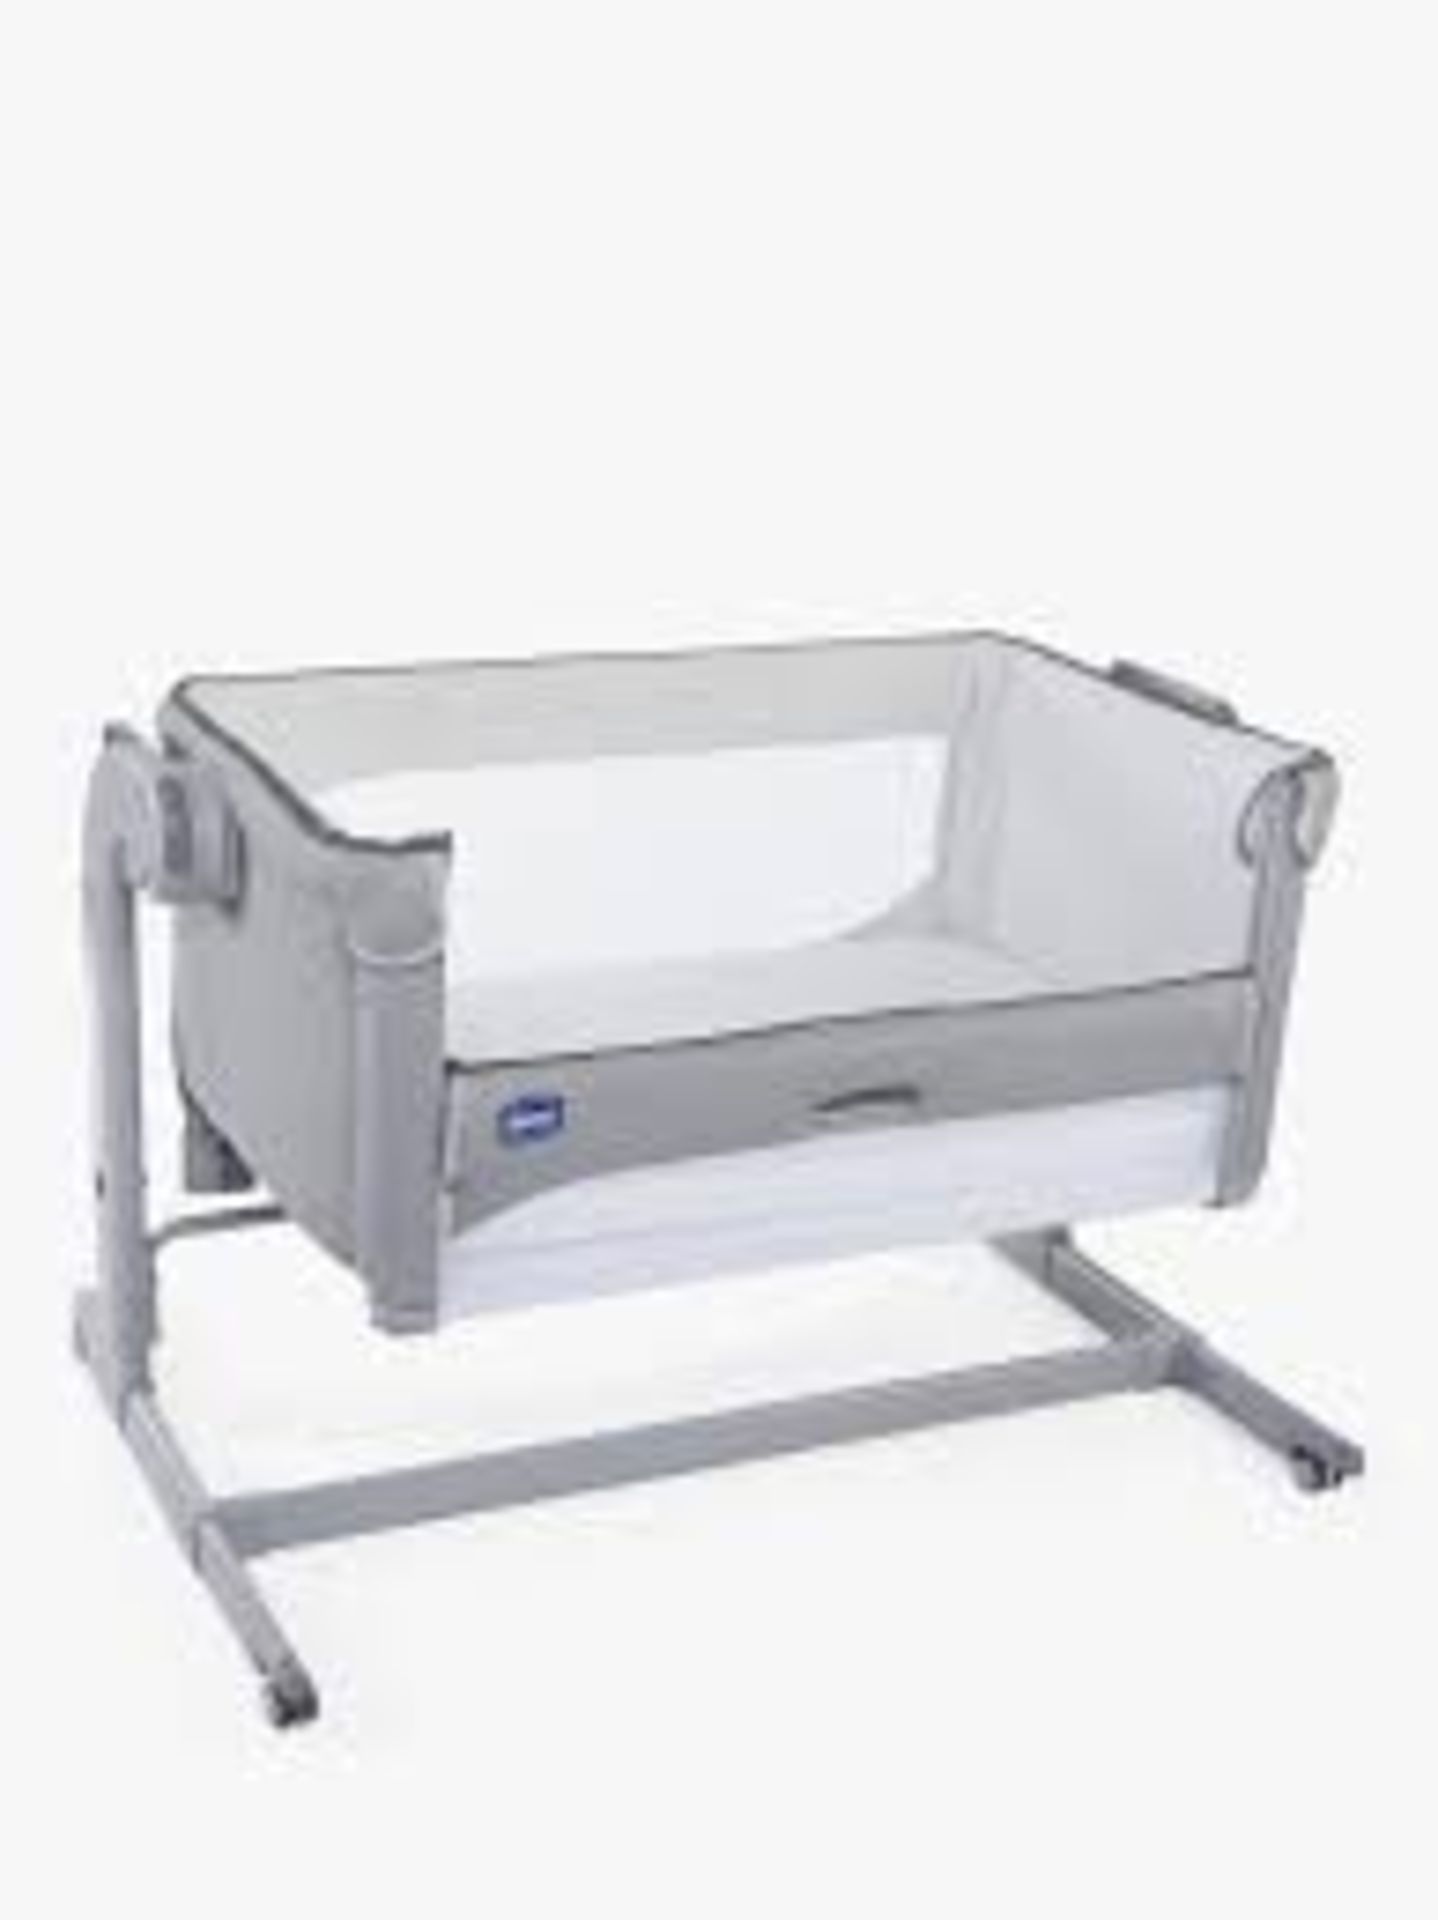 Boxed Chicco Next to Me Magic Infant Crib RRP £240 (3412037) (Public Viewing and Appraisals